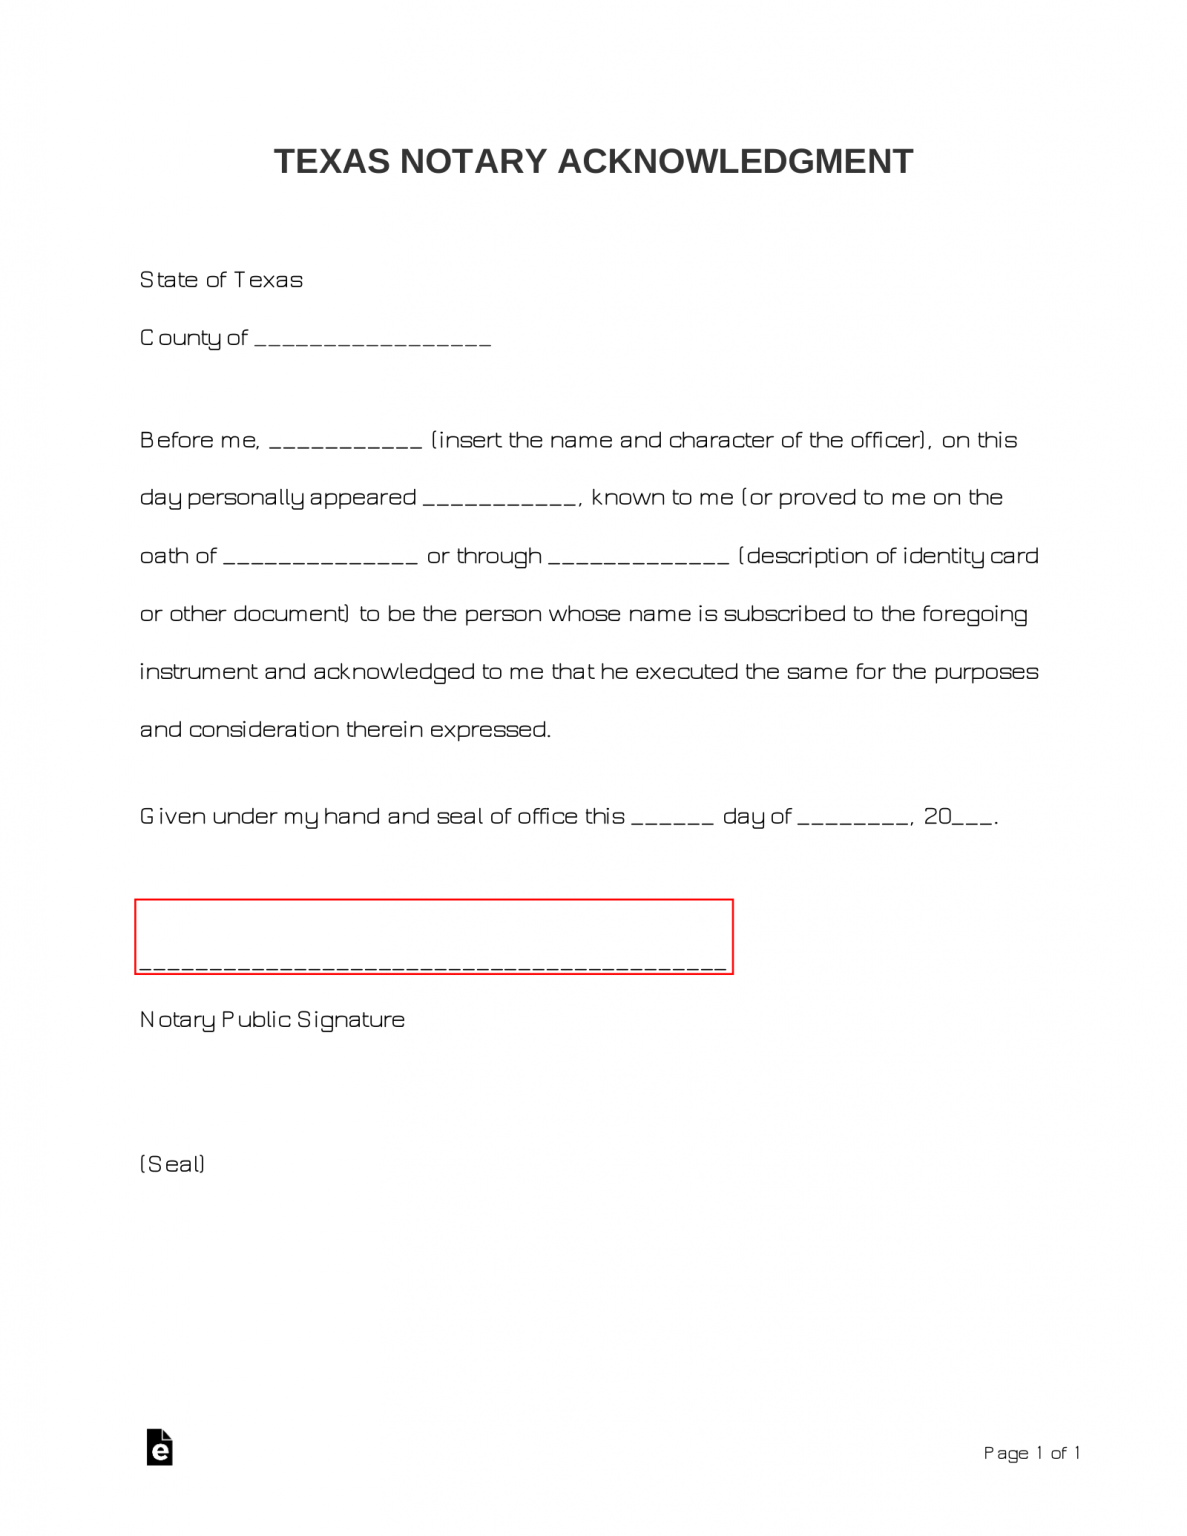 Free Texas Notary Acknowledgment Form - PDF | Word – eForms